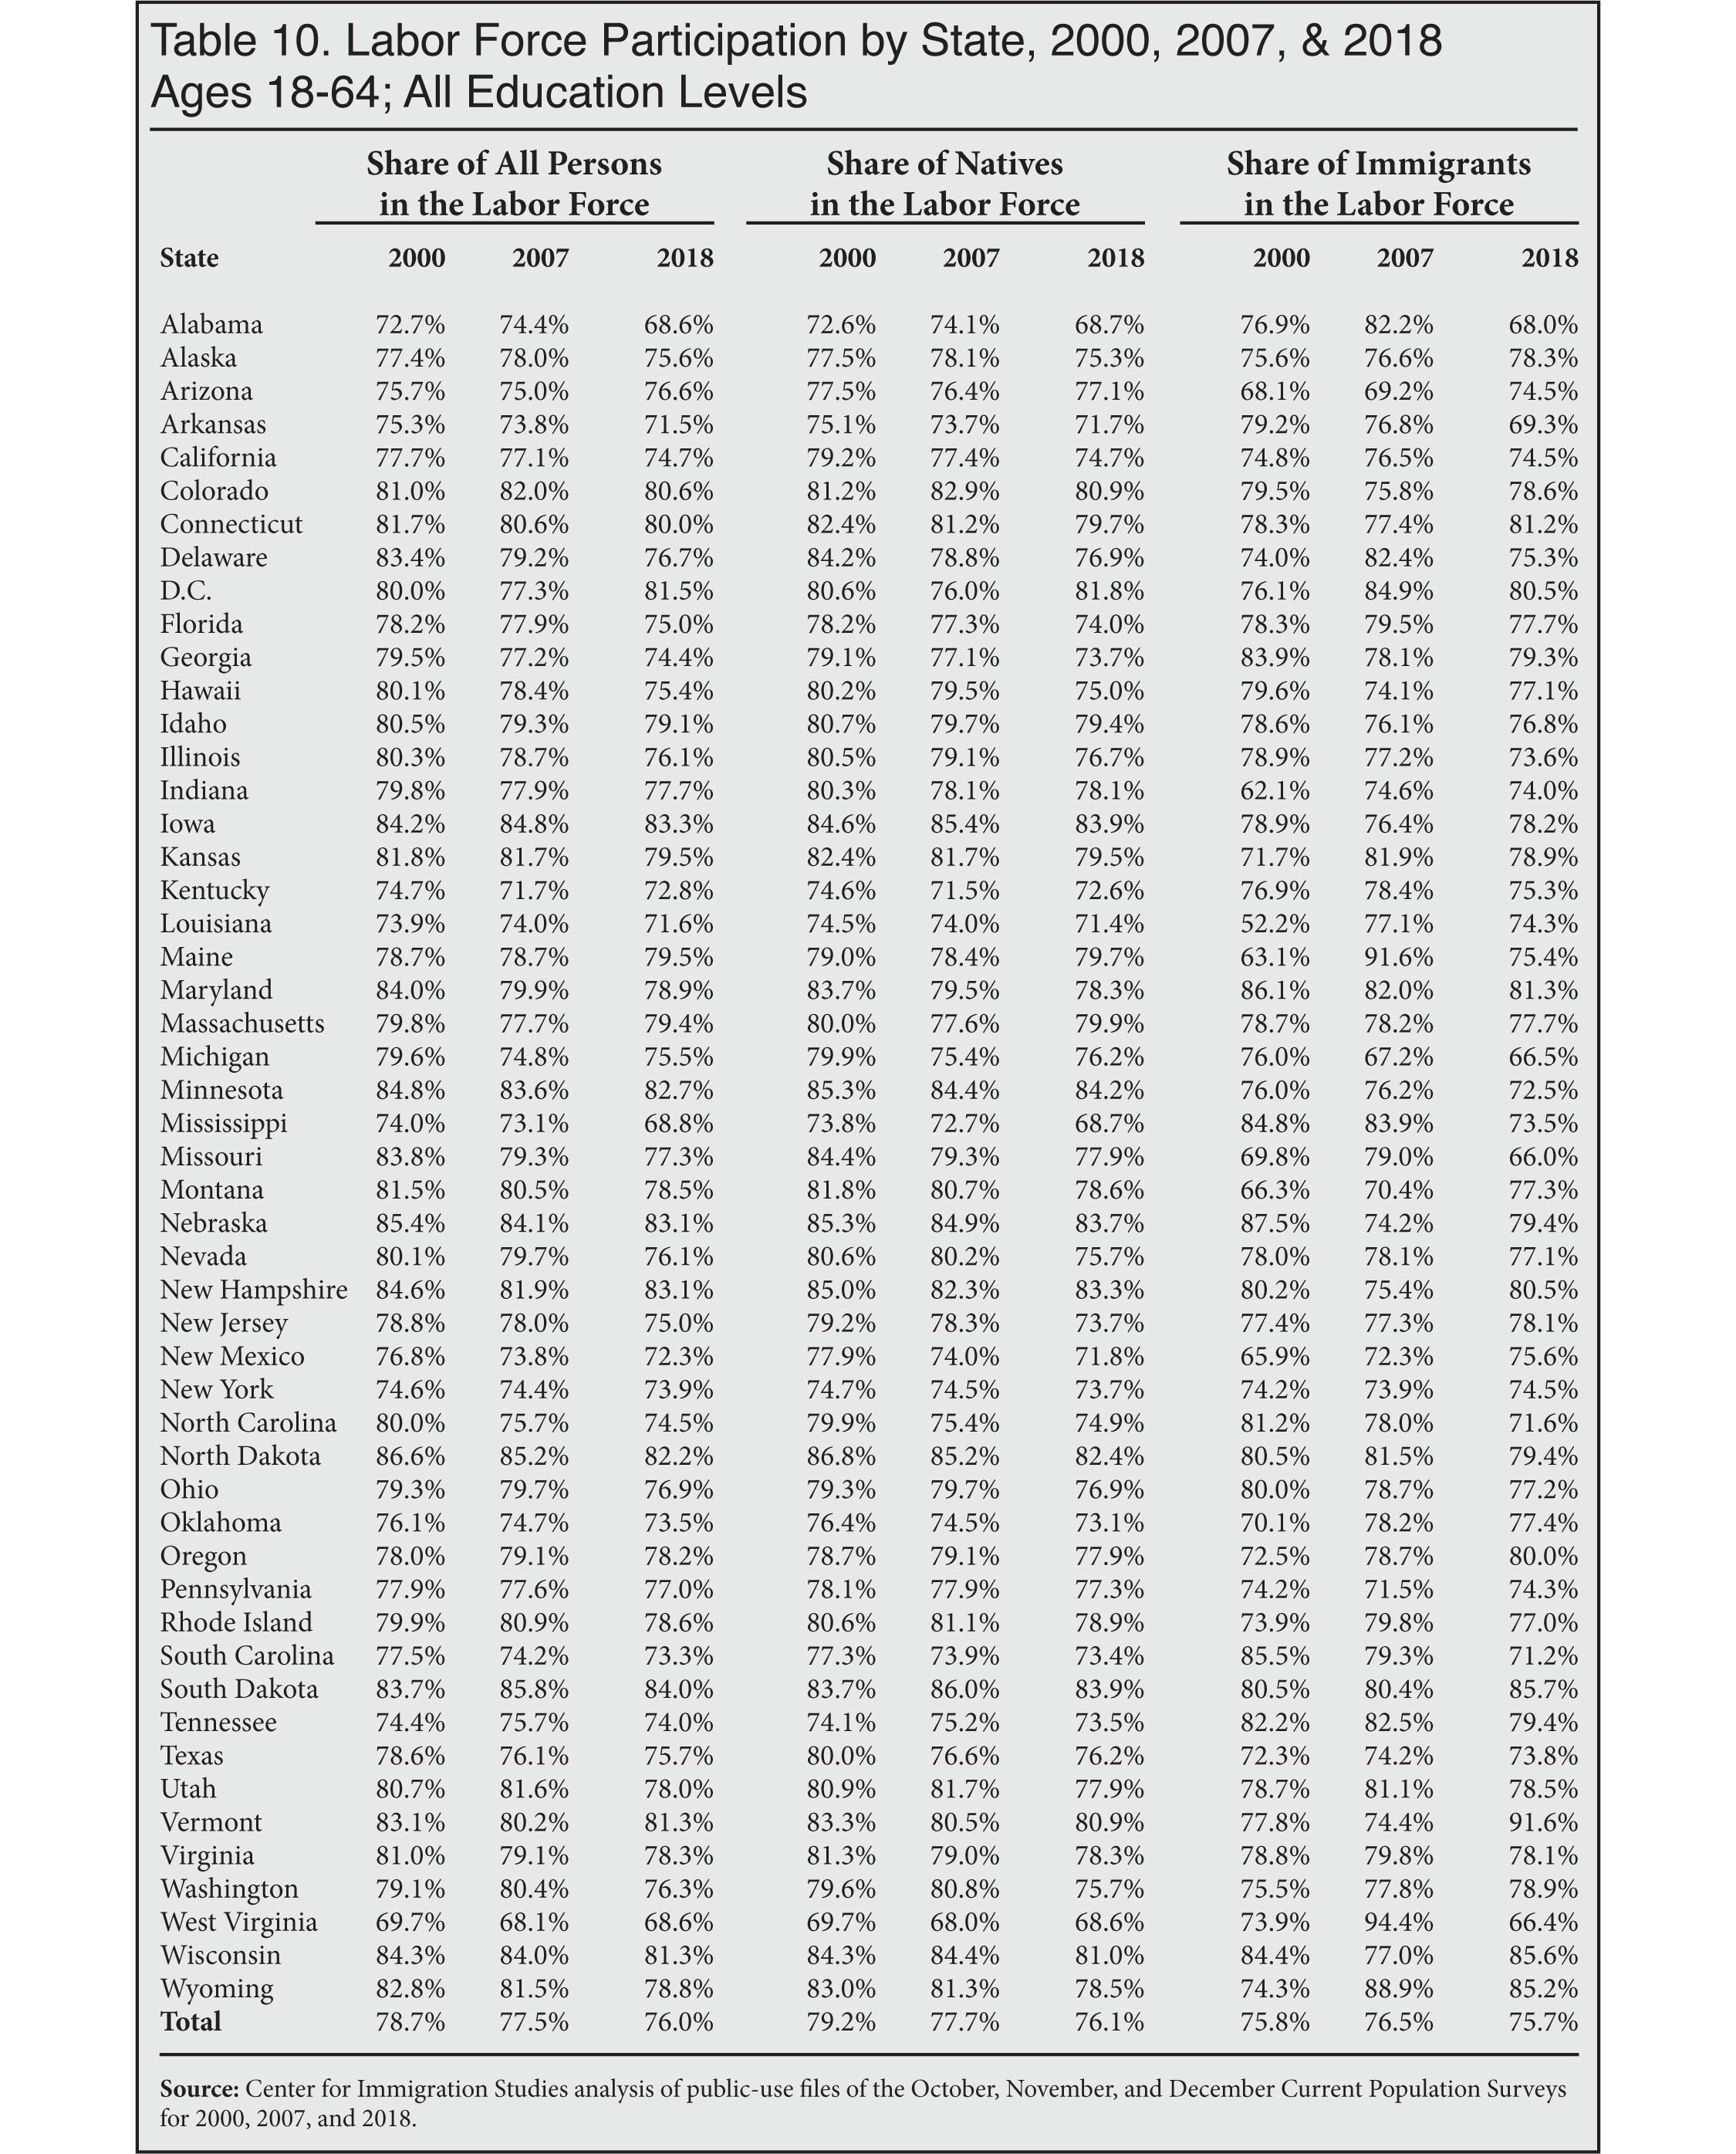 Table: Labor Force Participation by State, 2000, 2007, 2018